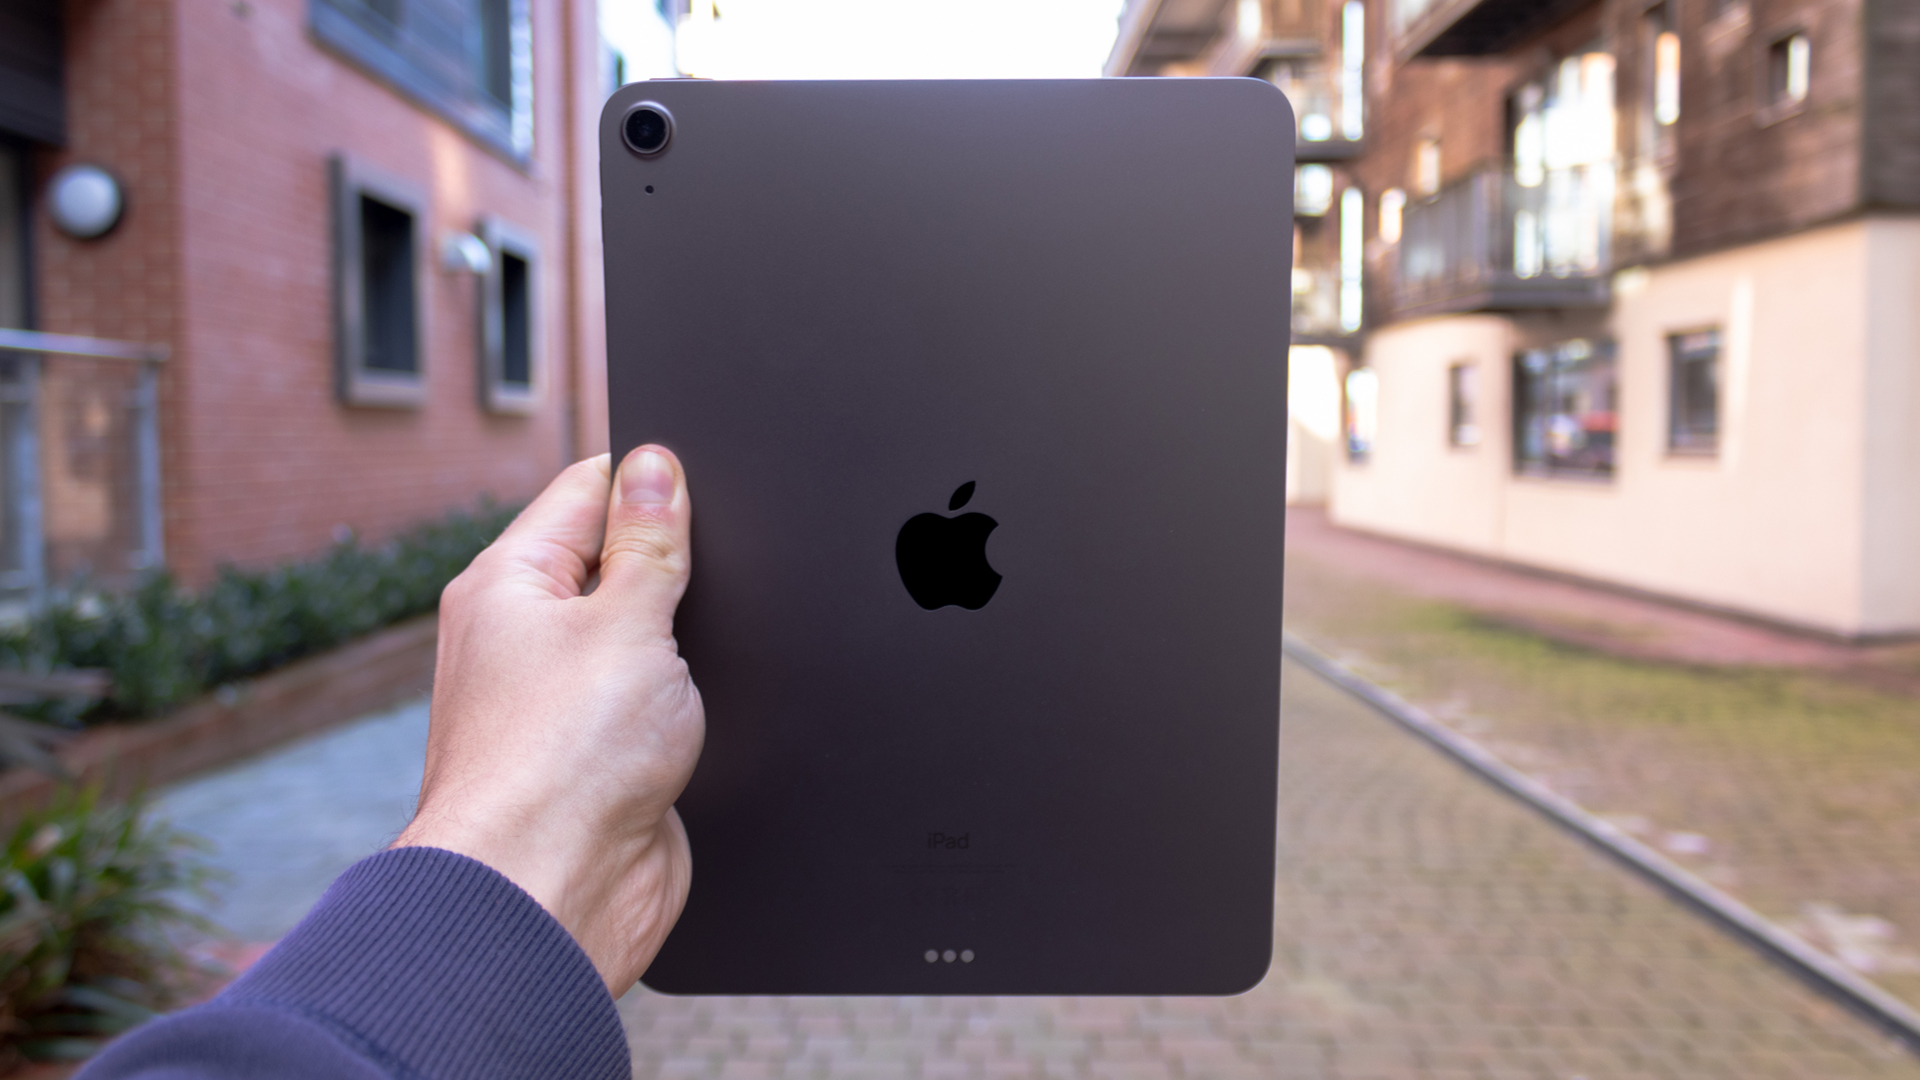 A photograph of the rear of an Apple iPad Air being held up outside